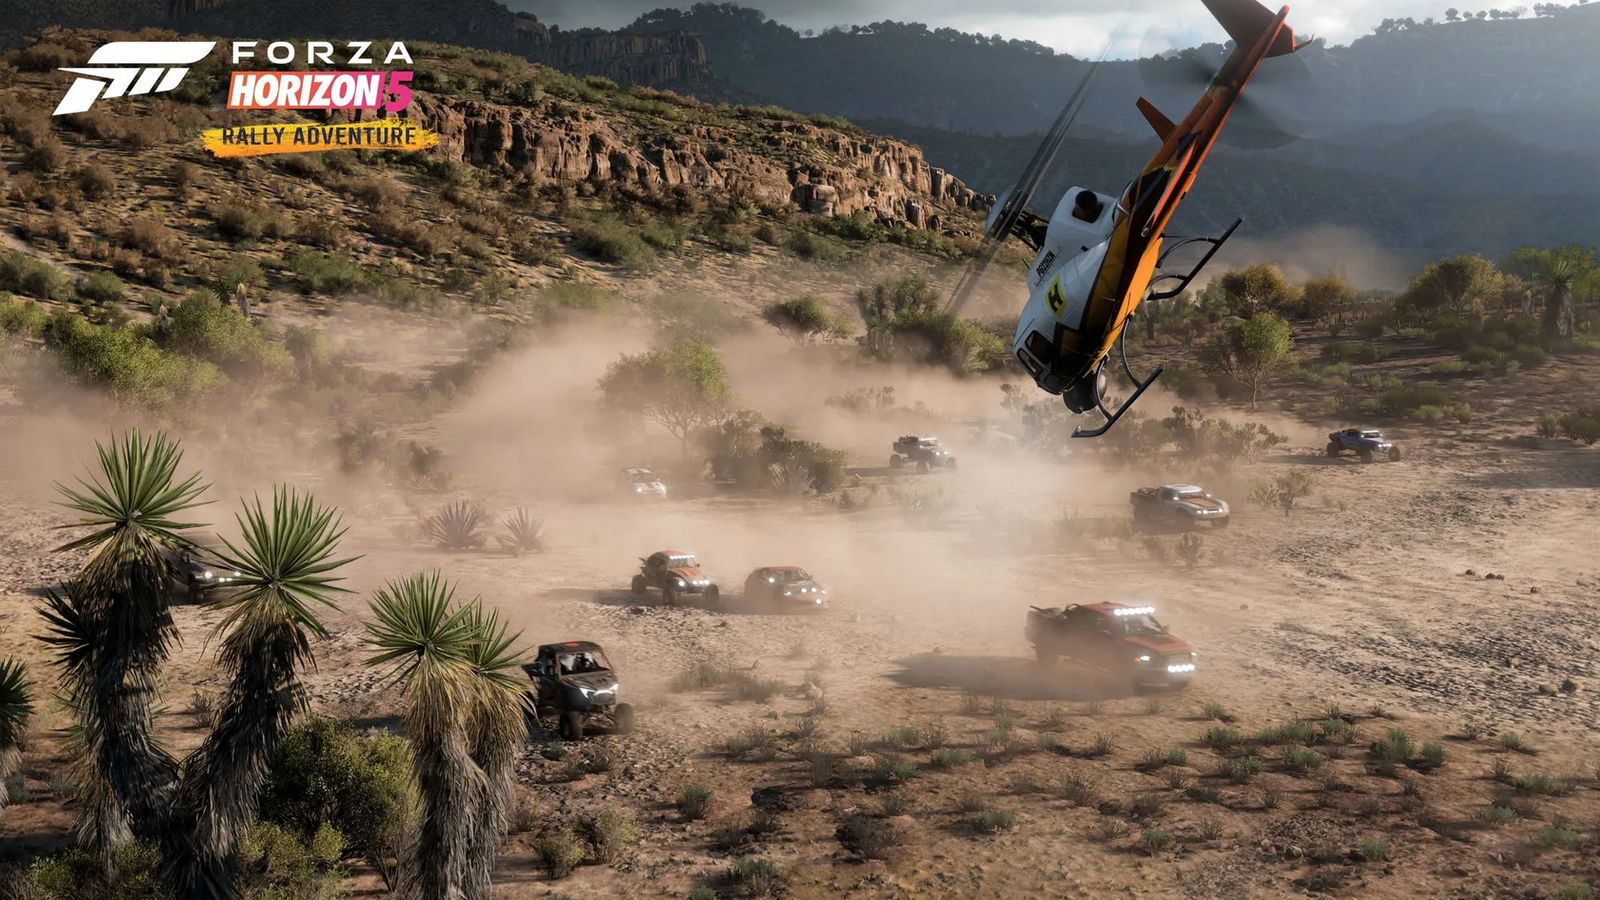 How to join a rally team in Forza Horizon 5 Rally Adventure